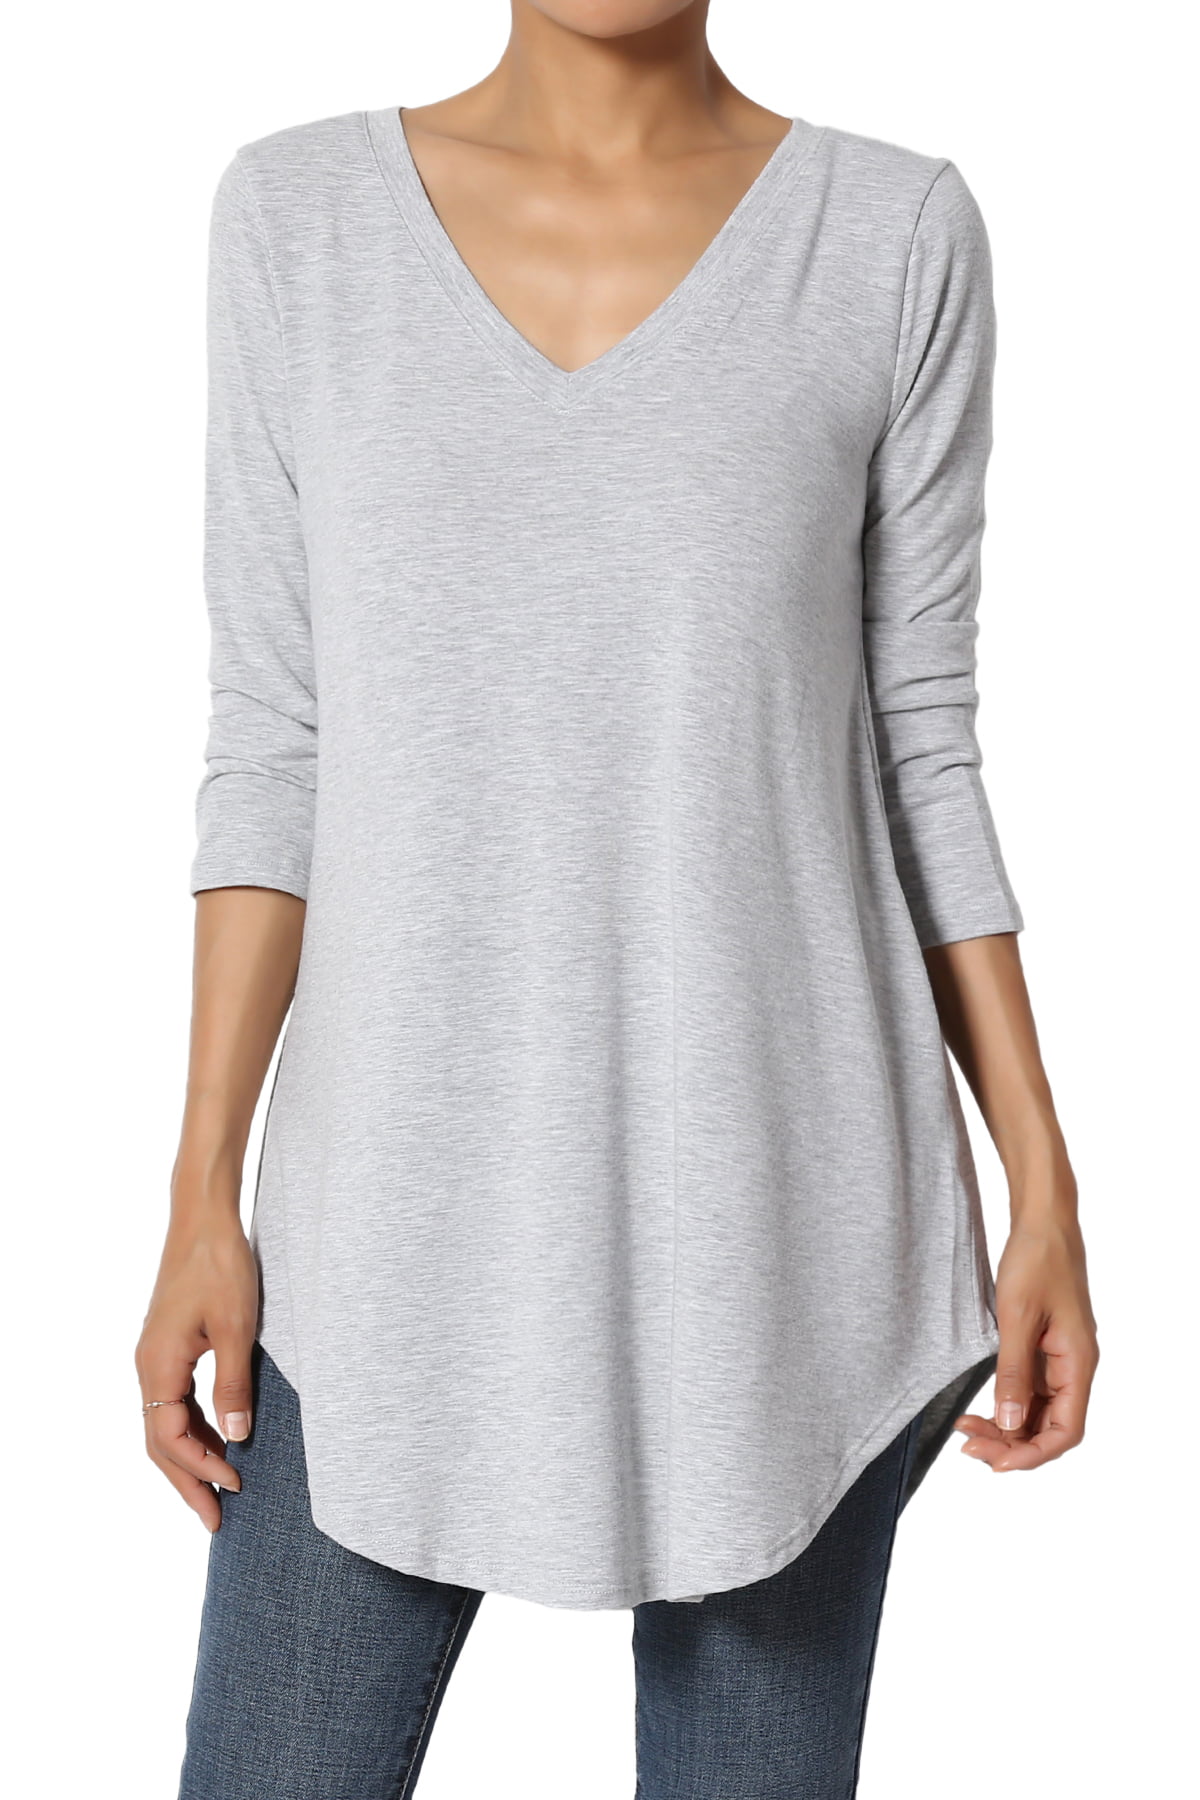 NEW One World Knit & Woven 3/4 Sleeved Layered Front Asymmetrical Top 